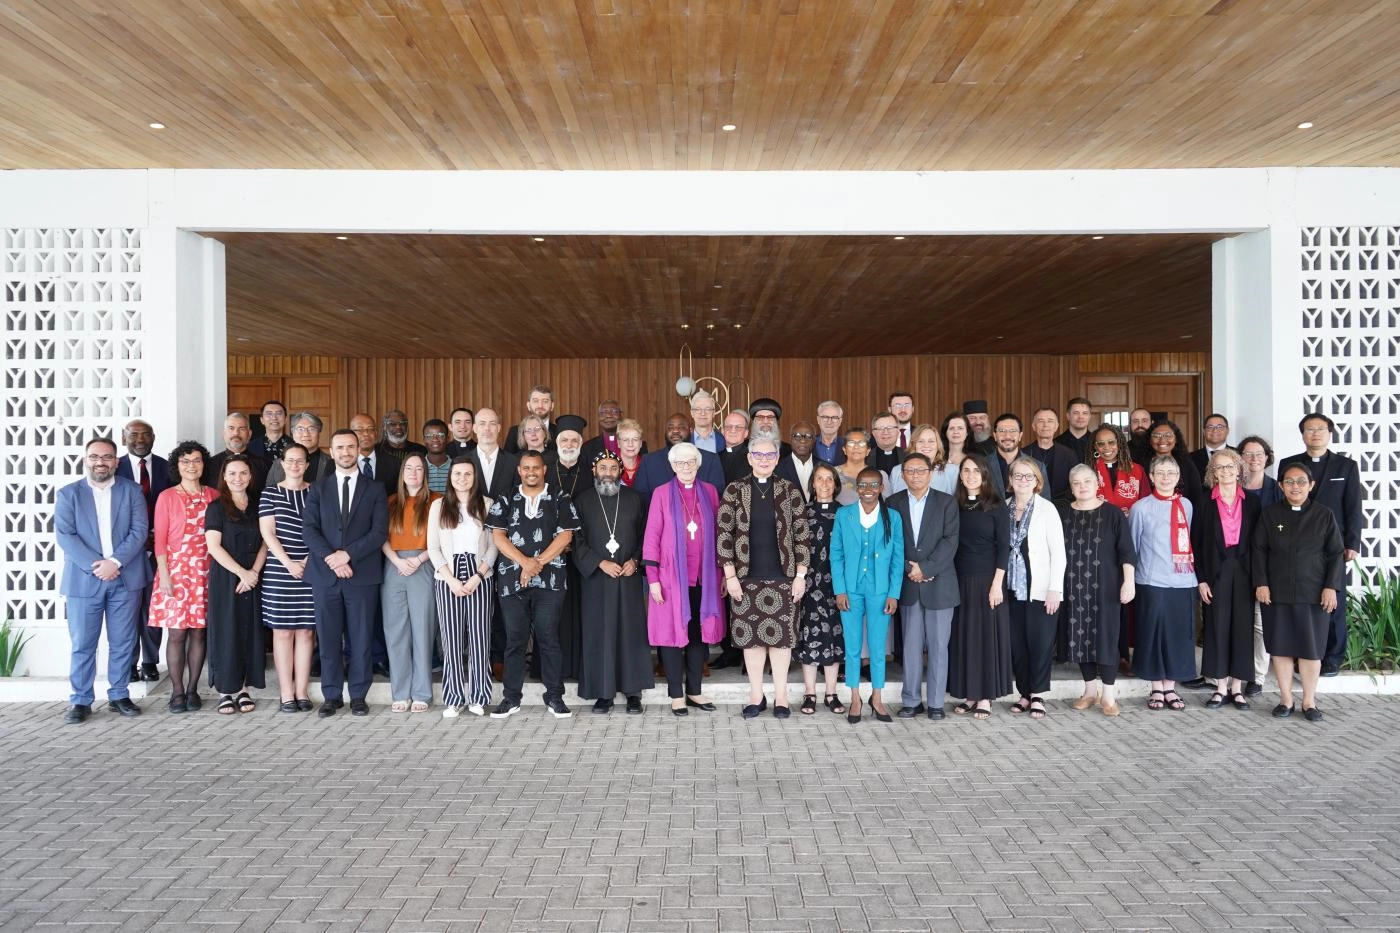 Group photo of the World Council of Churches Commission on Faith and Order meeting in Tondano, North Sulawesi, Indonesia